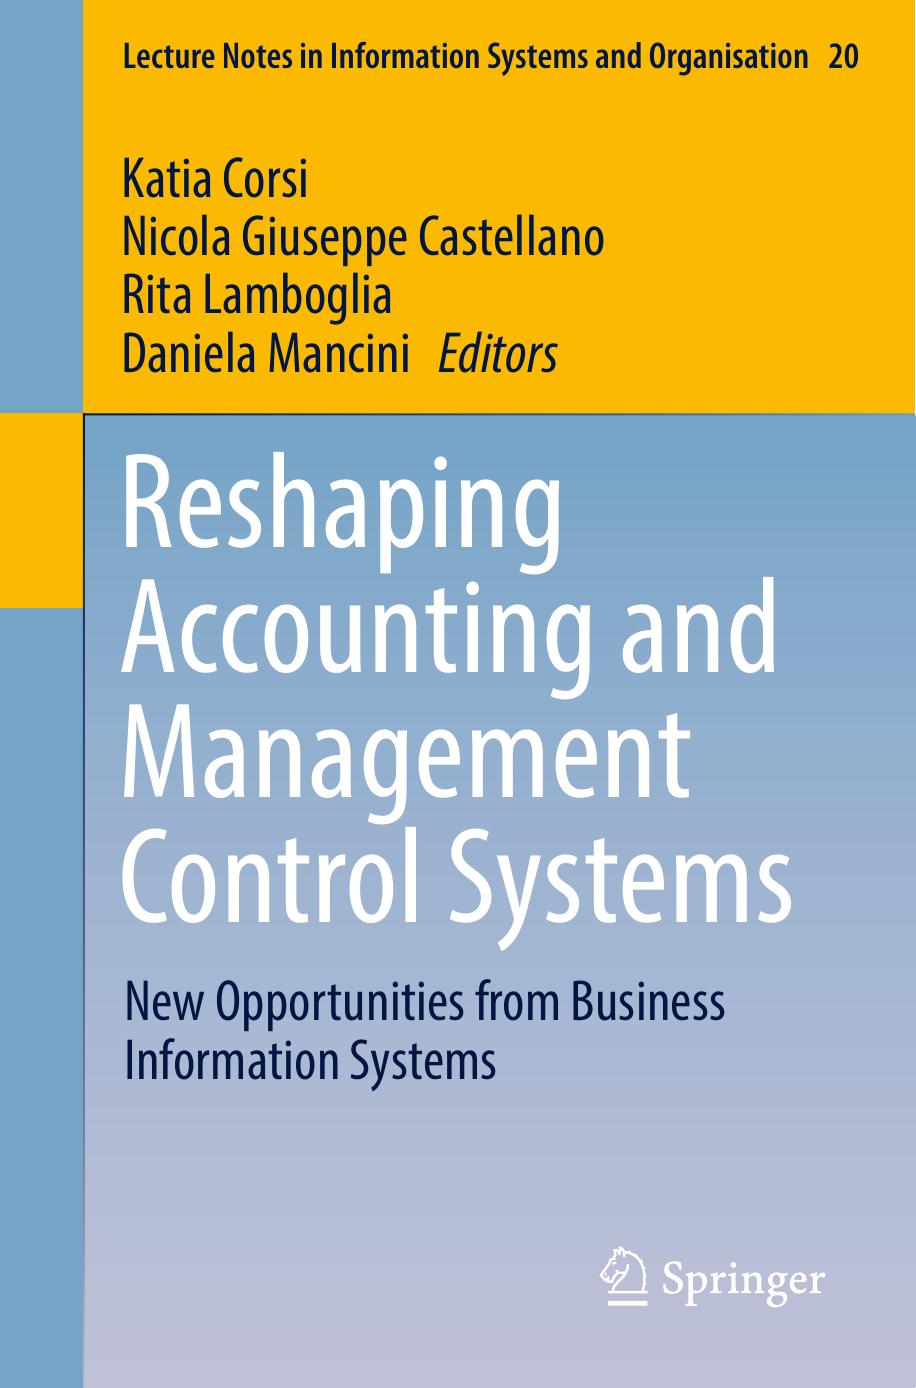 Reshaping Accounting and Management Control Systems 2017.pdf